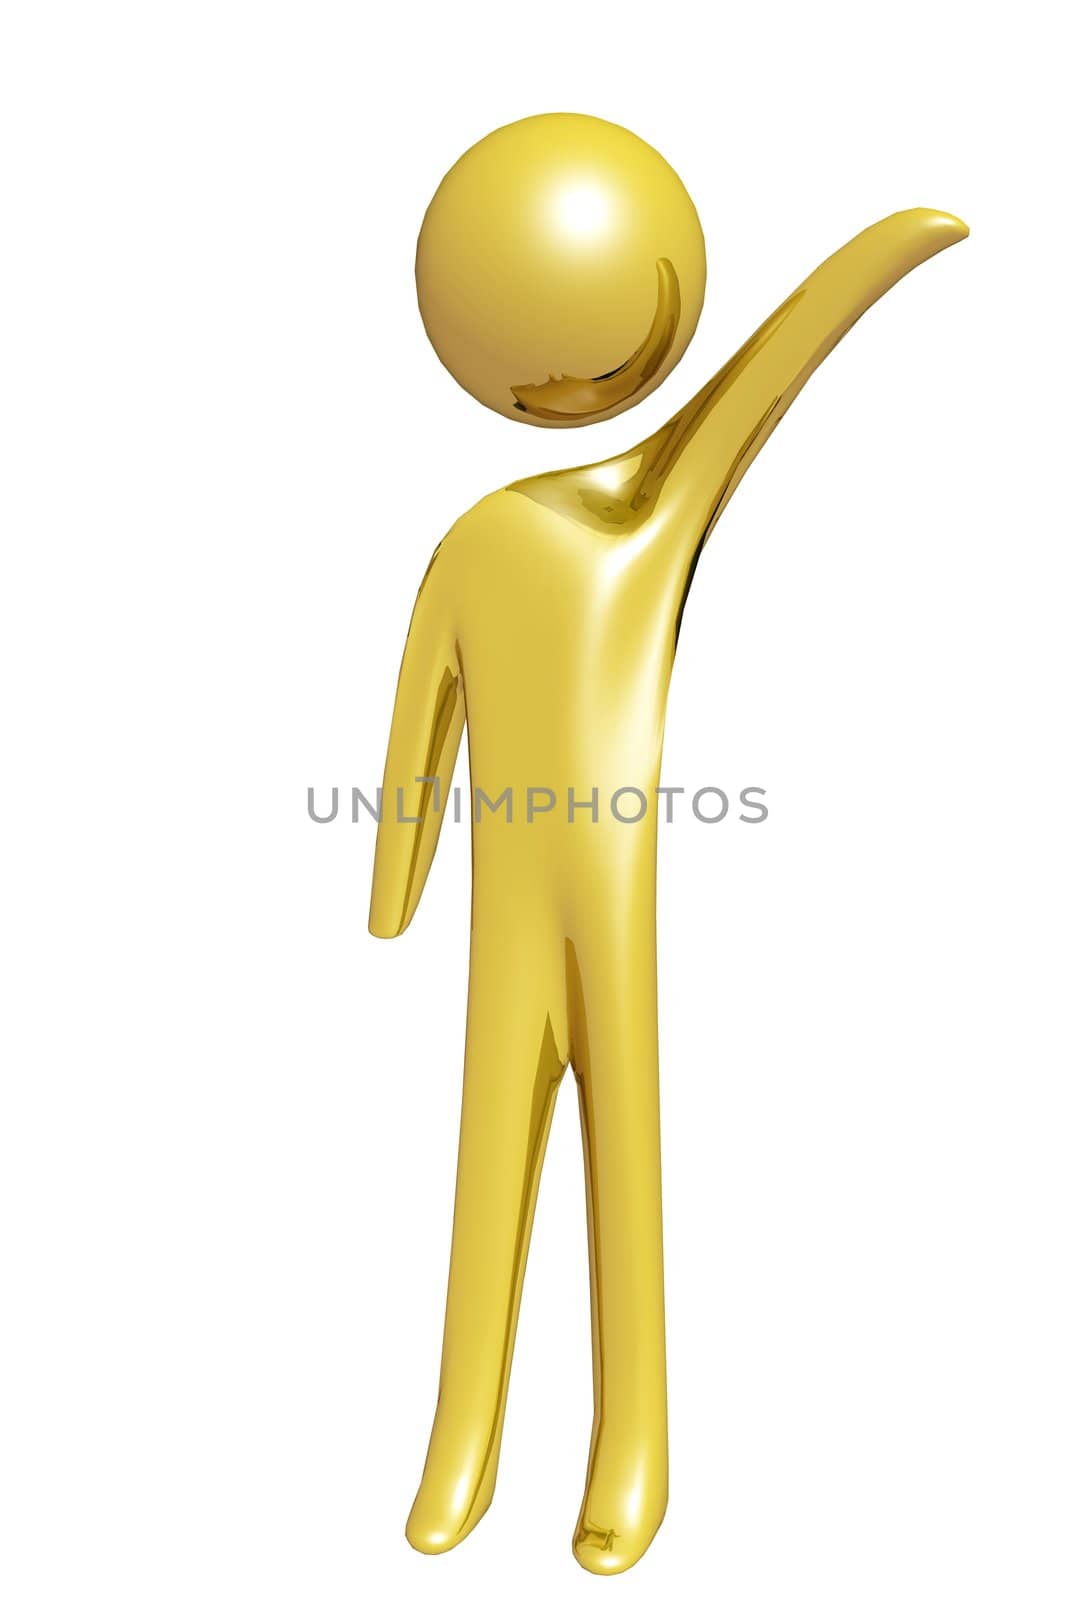 Golden character showing something. Image is a 3D render.